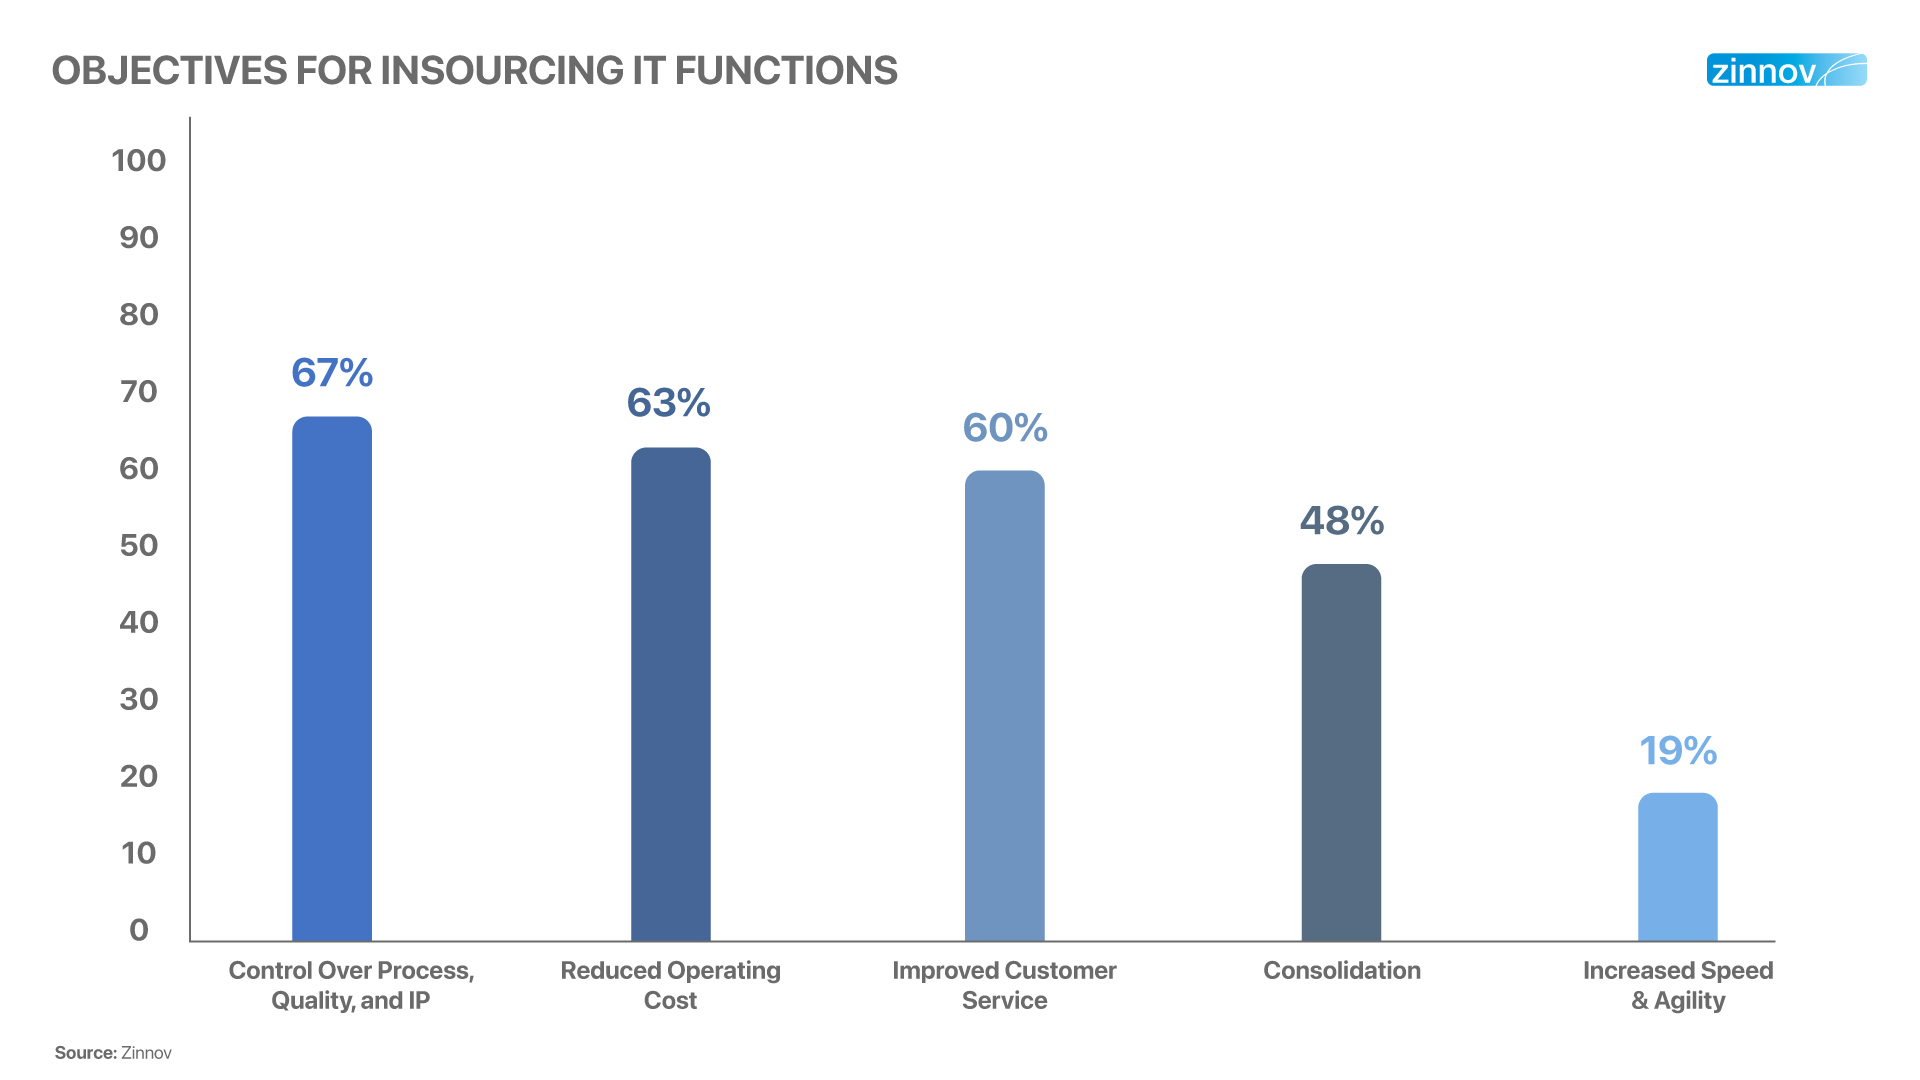 Objective for insourcing IT functions